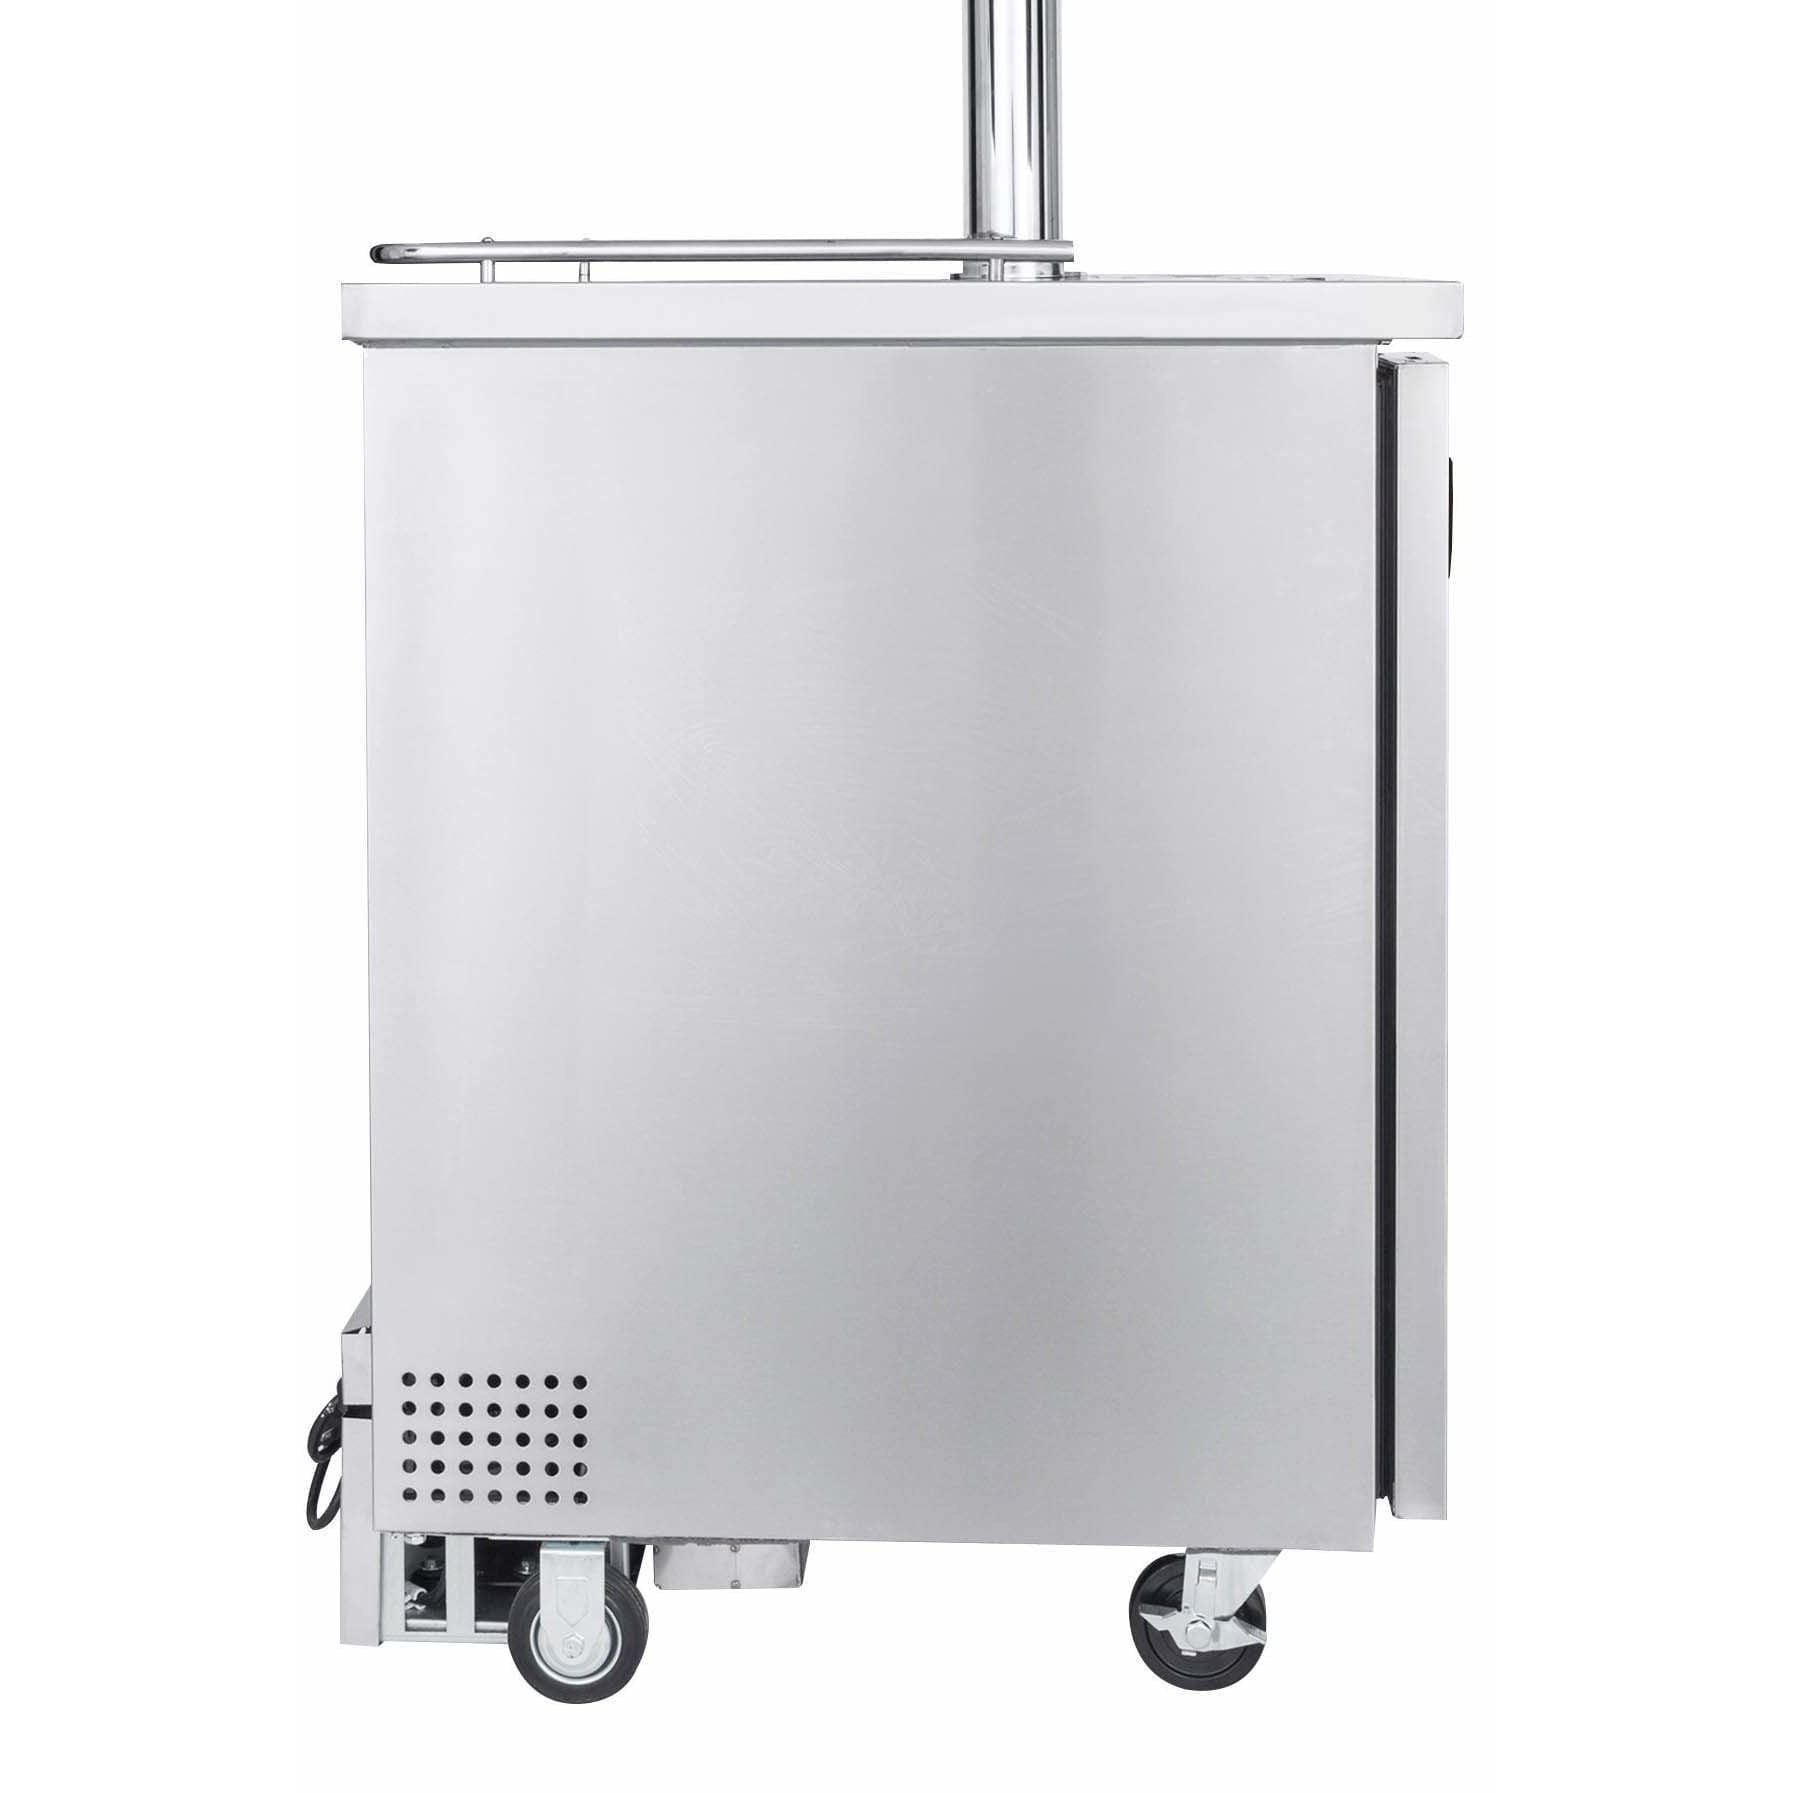 Kegco 24" Wide Dual Tap Stainless Steel Home Brew Kegerator HBK1XS-2 Wine Coolers Empire